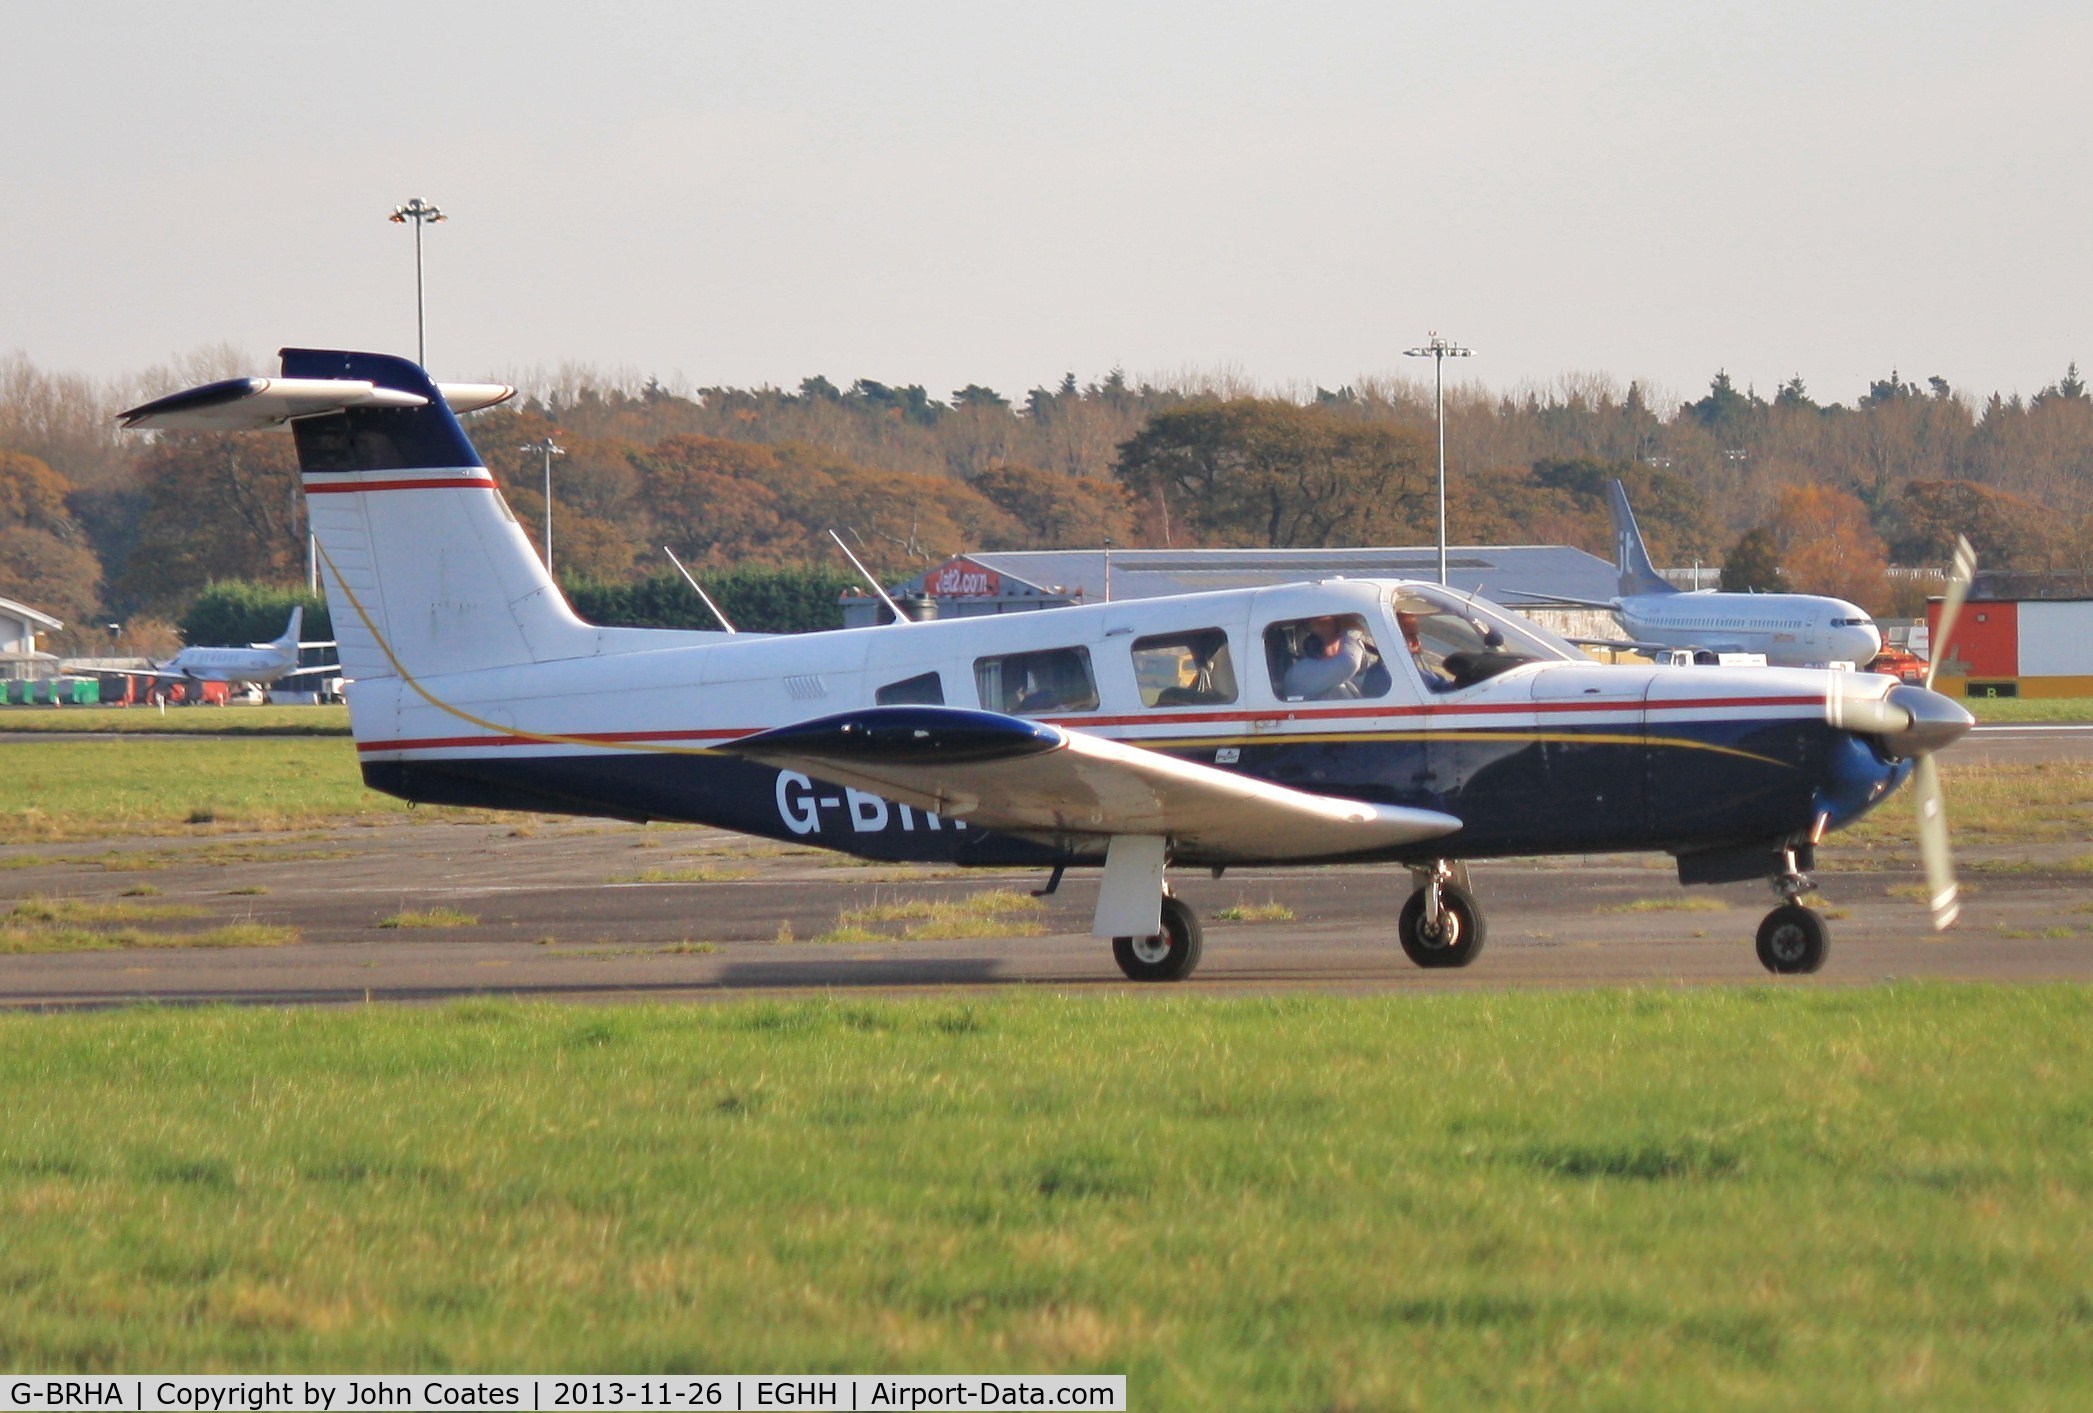 G-BRHA, 1978 Piper PA-32RT-300 Lance II C/N 32R-7985076, About to enter 08 to depart